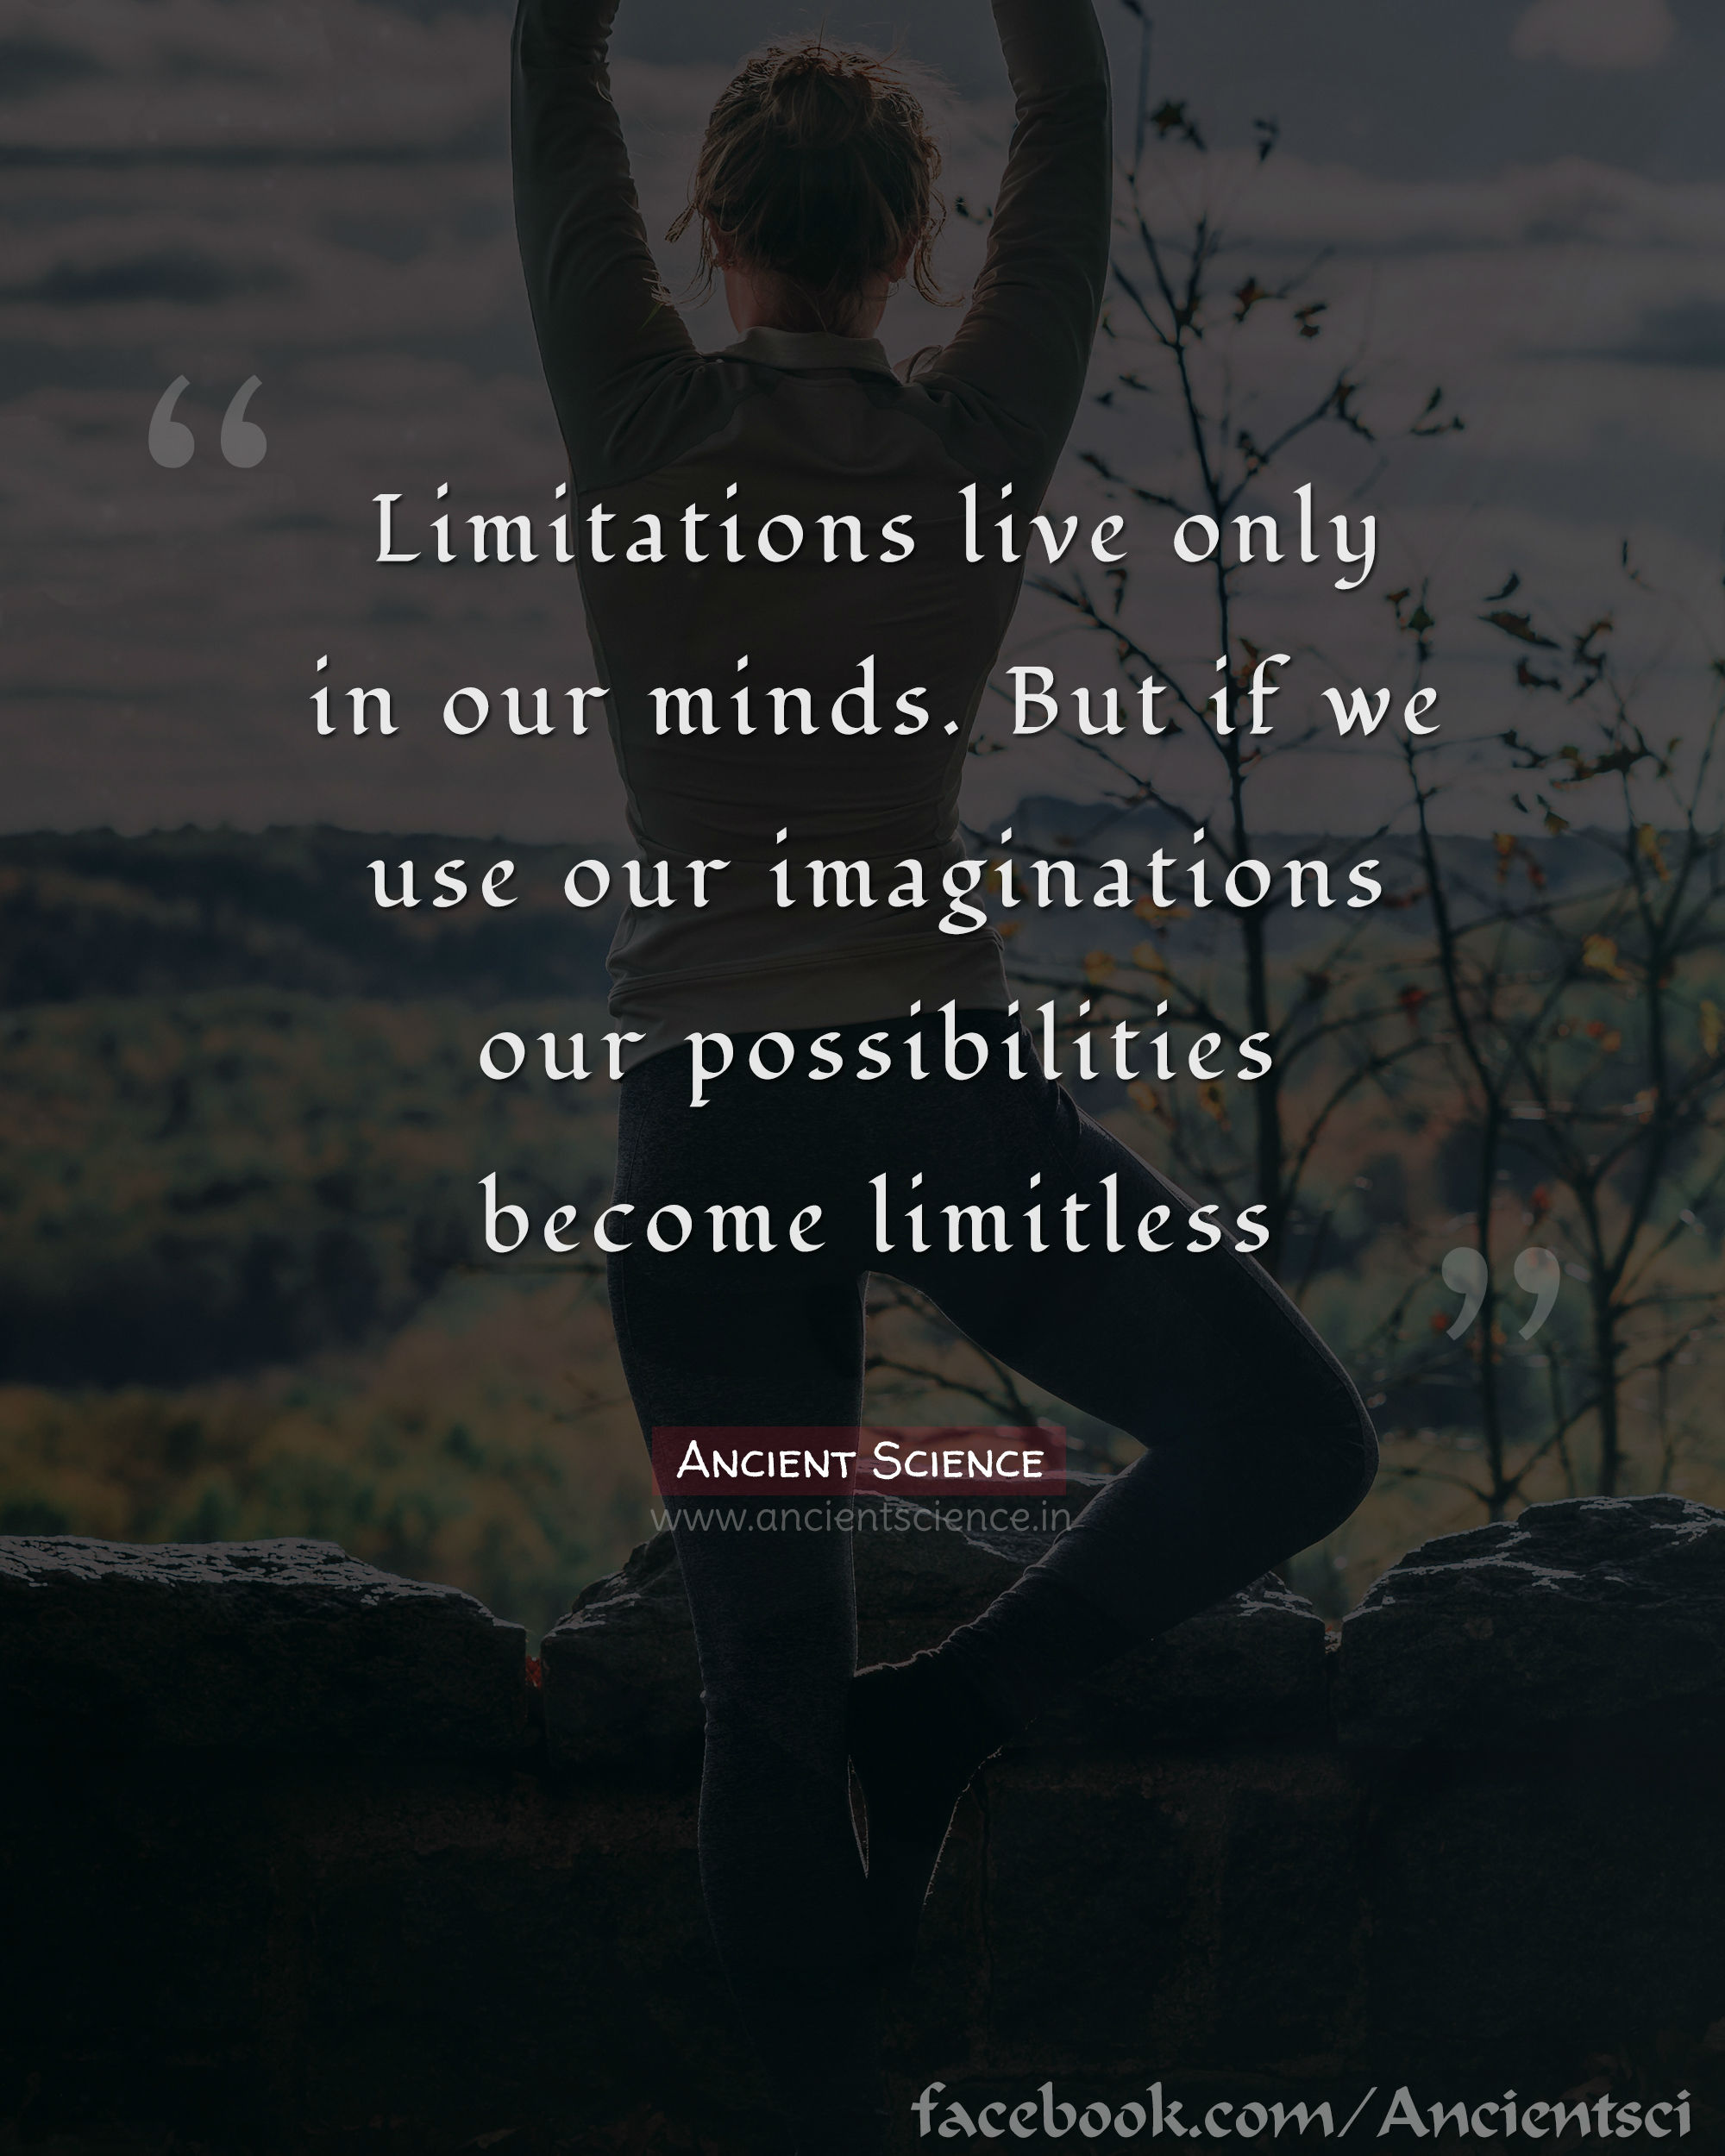 Limitations live only in our minds, But if we use our imaginations, our possibilities become limitless.